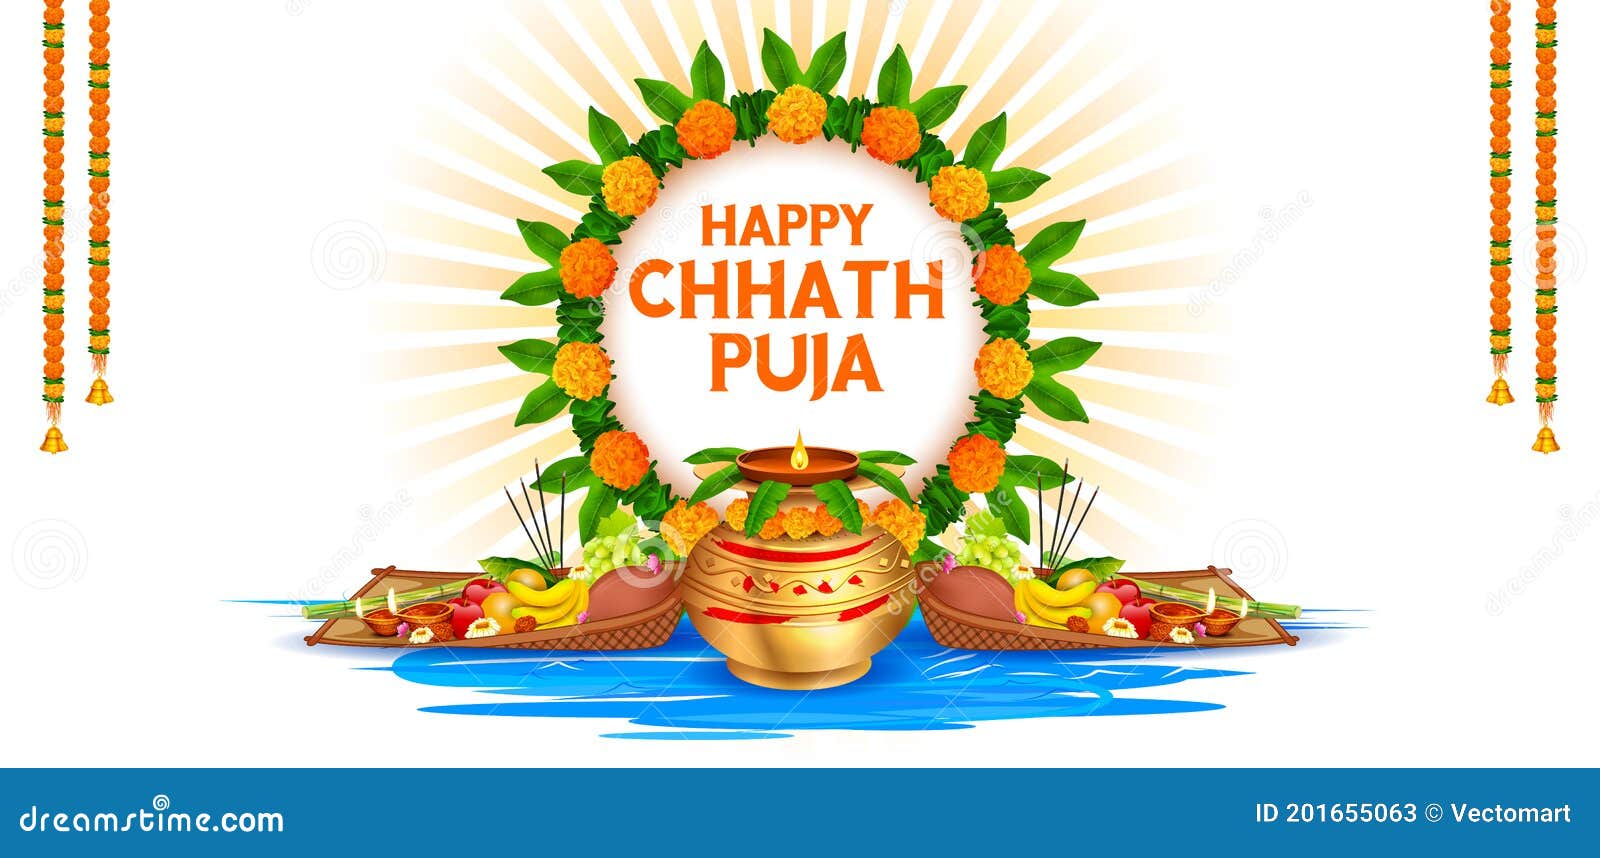 Happy Chhath Puja Holiday Background for Sun Festival of India ...